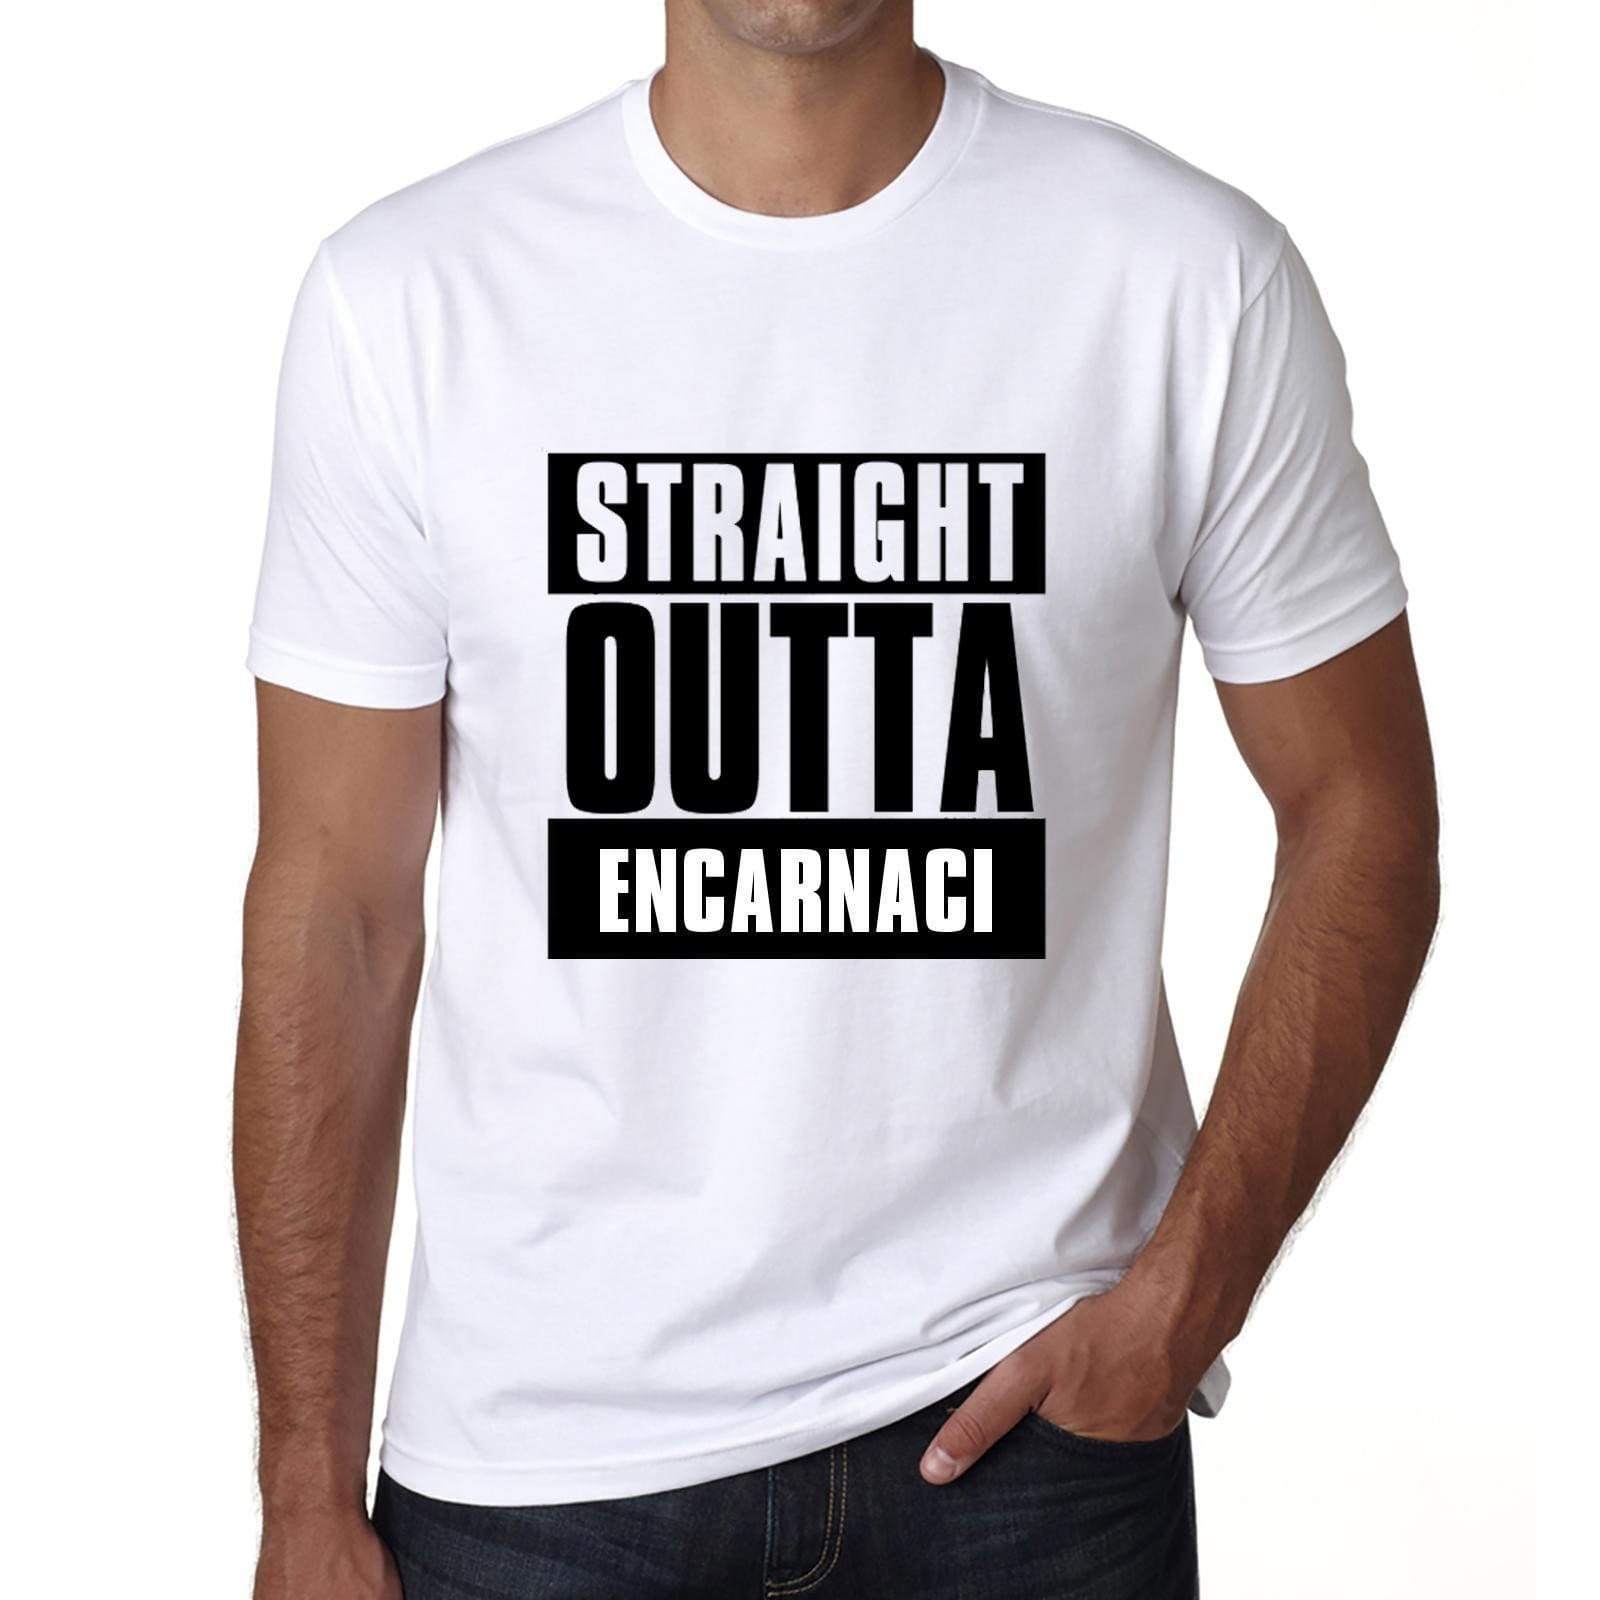 Straight Outta Encarnaci Mens Short Sleeve Round Neck T-Shirt 00027 - White / S - Casual